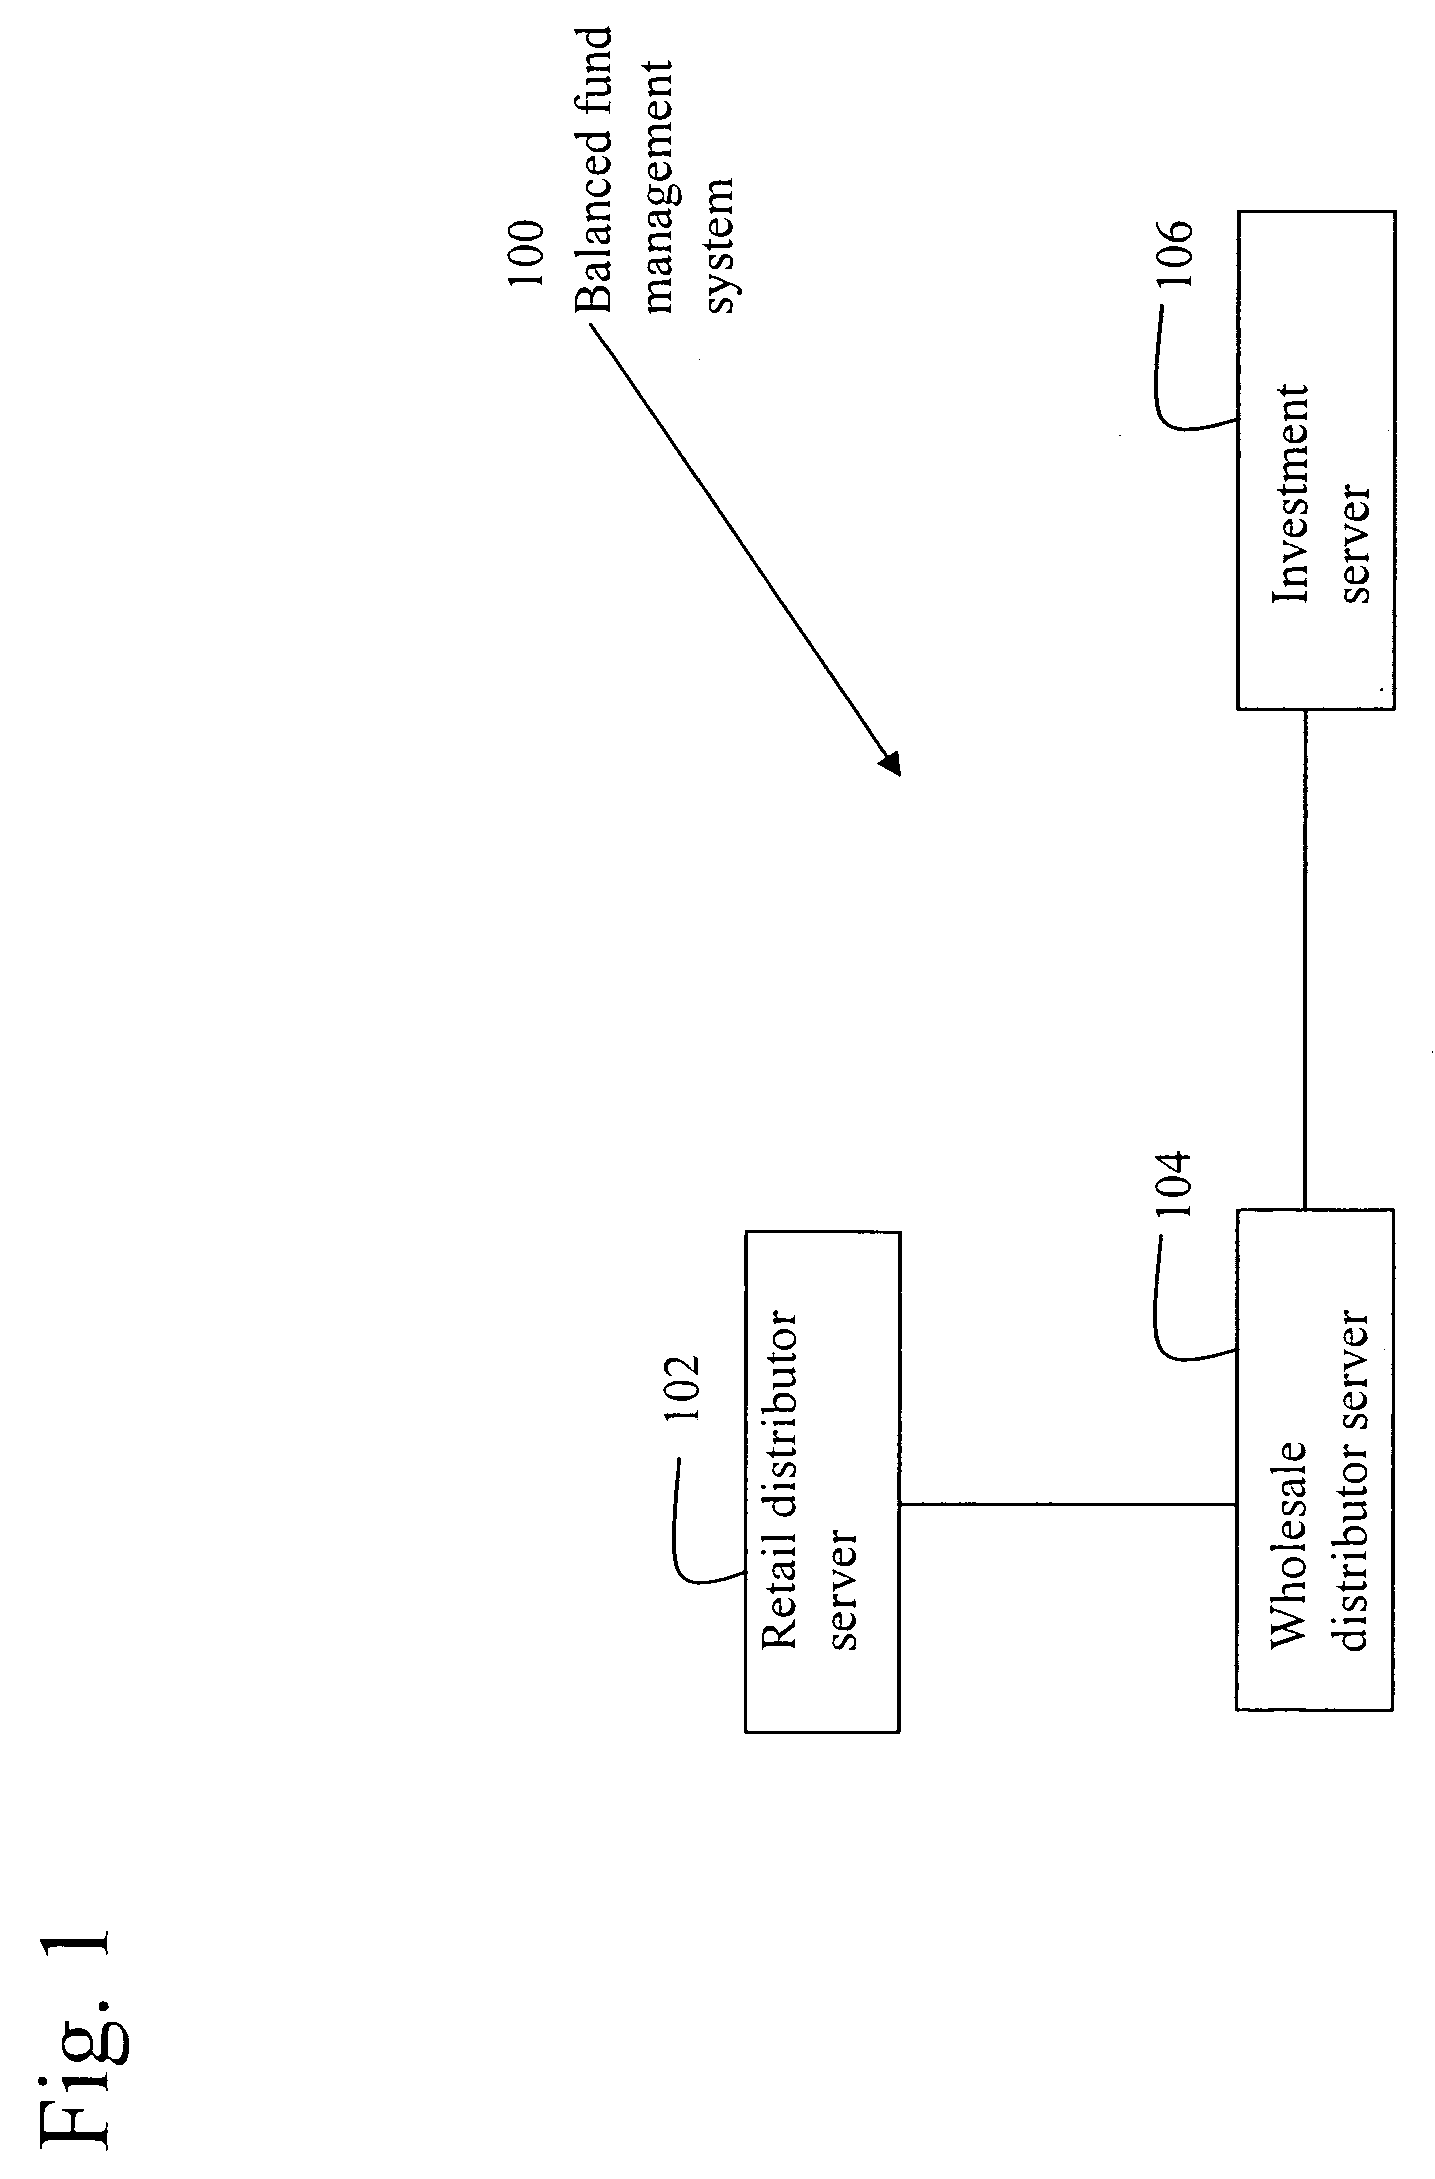 System and method for financial product management